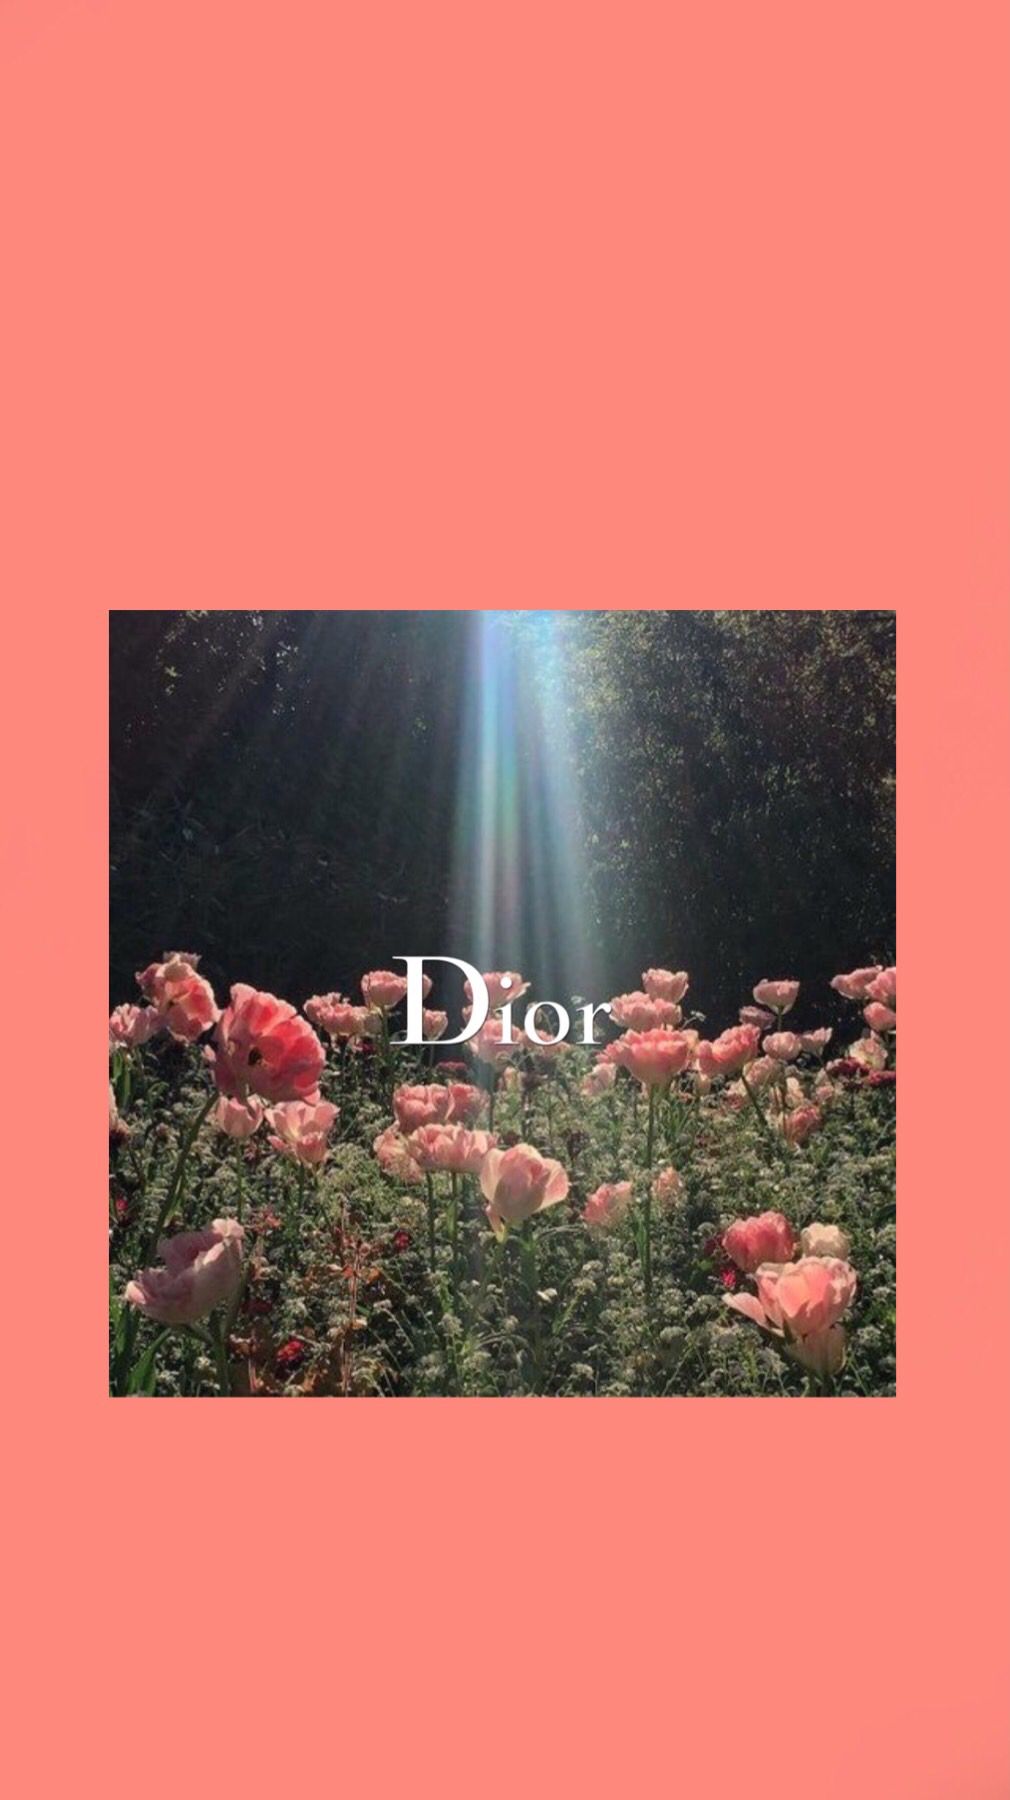 Flowers Dior Wallpaper. Iconic wallpaper, Vintage poster design, iPhone background wallpaper